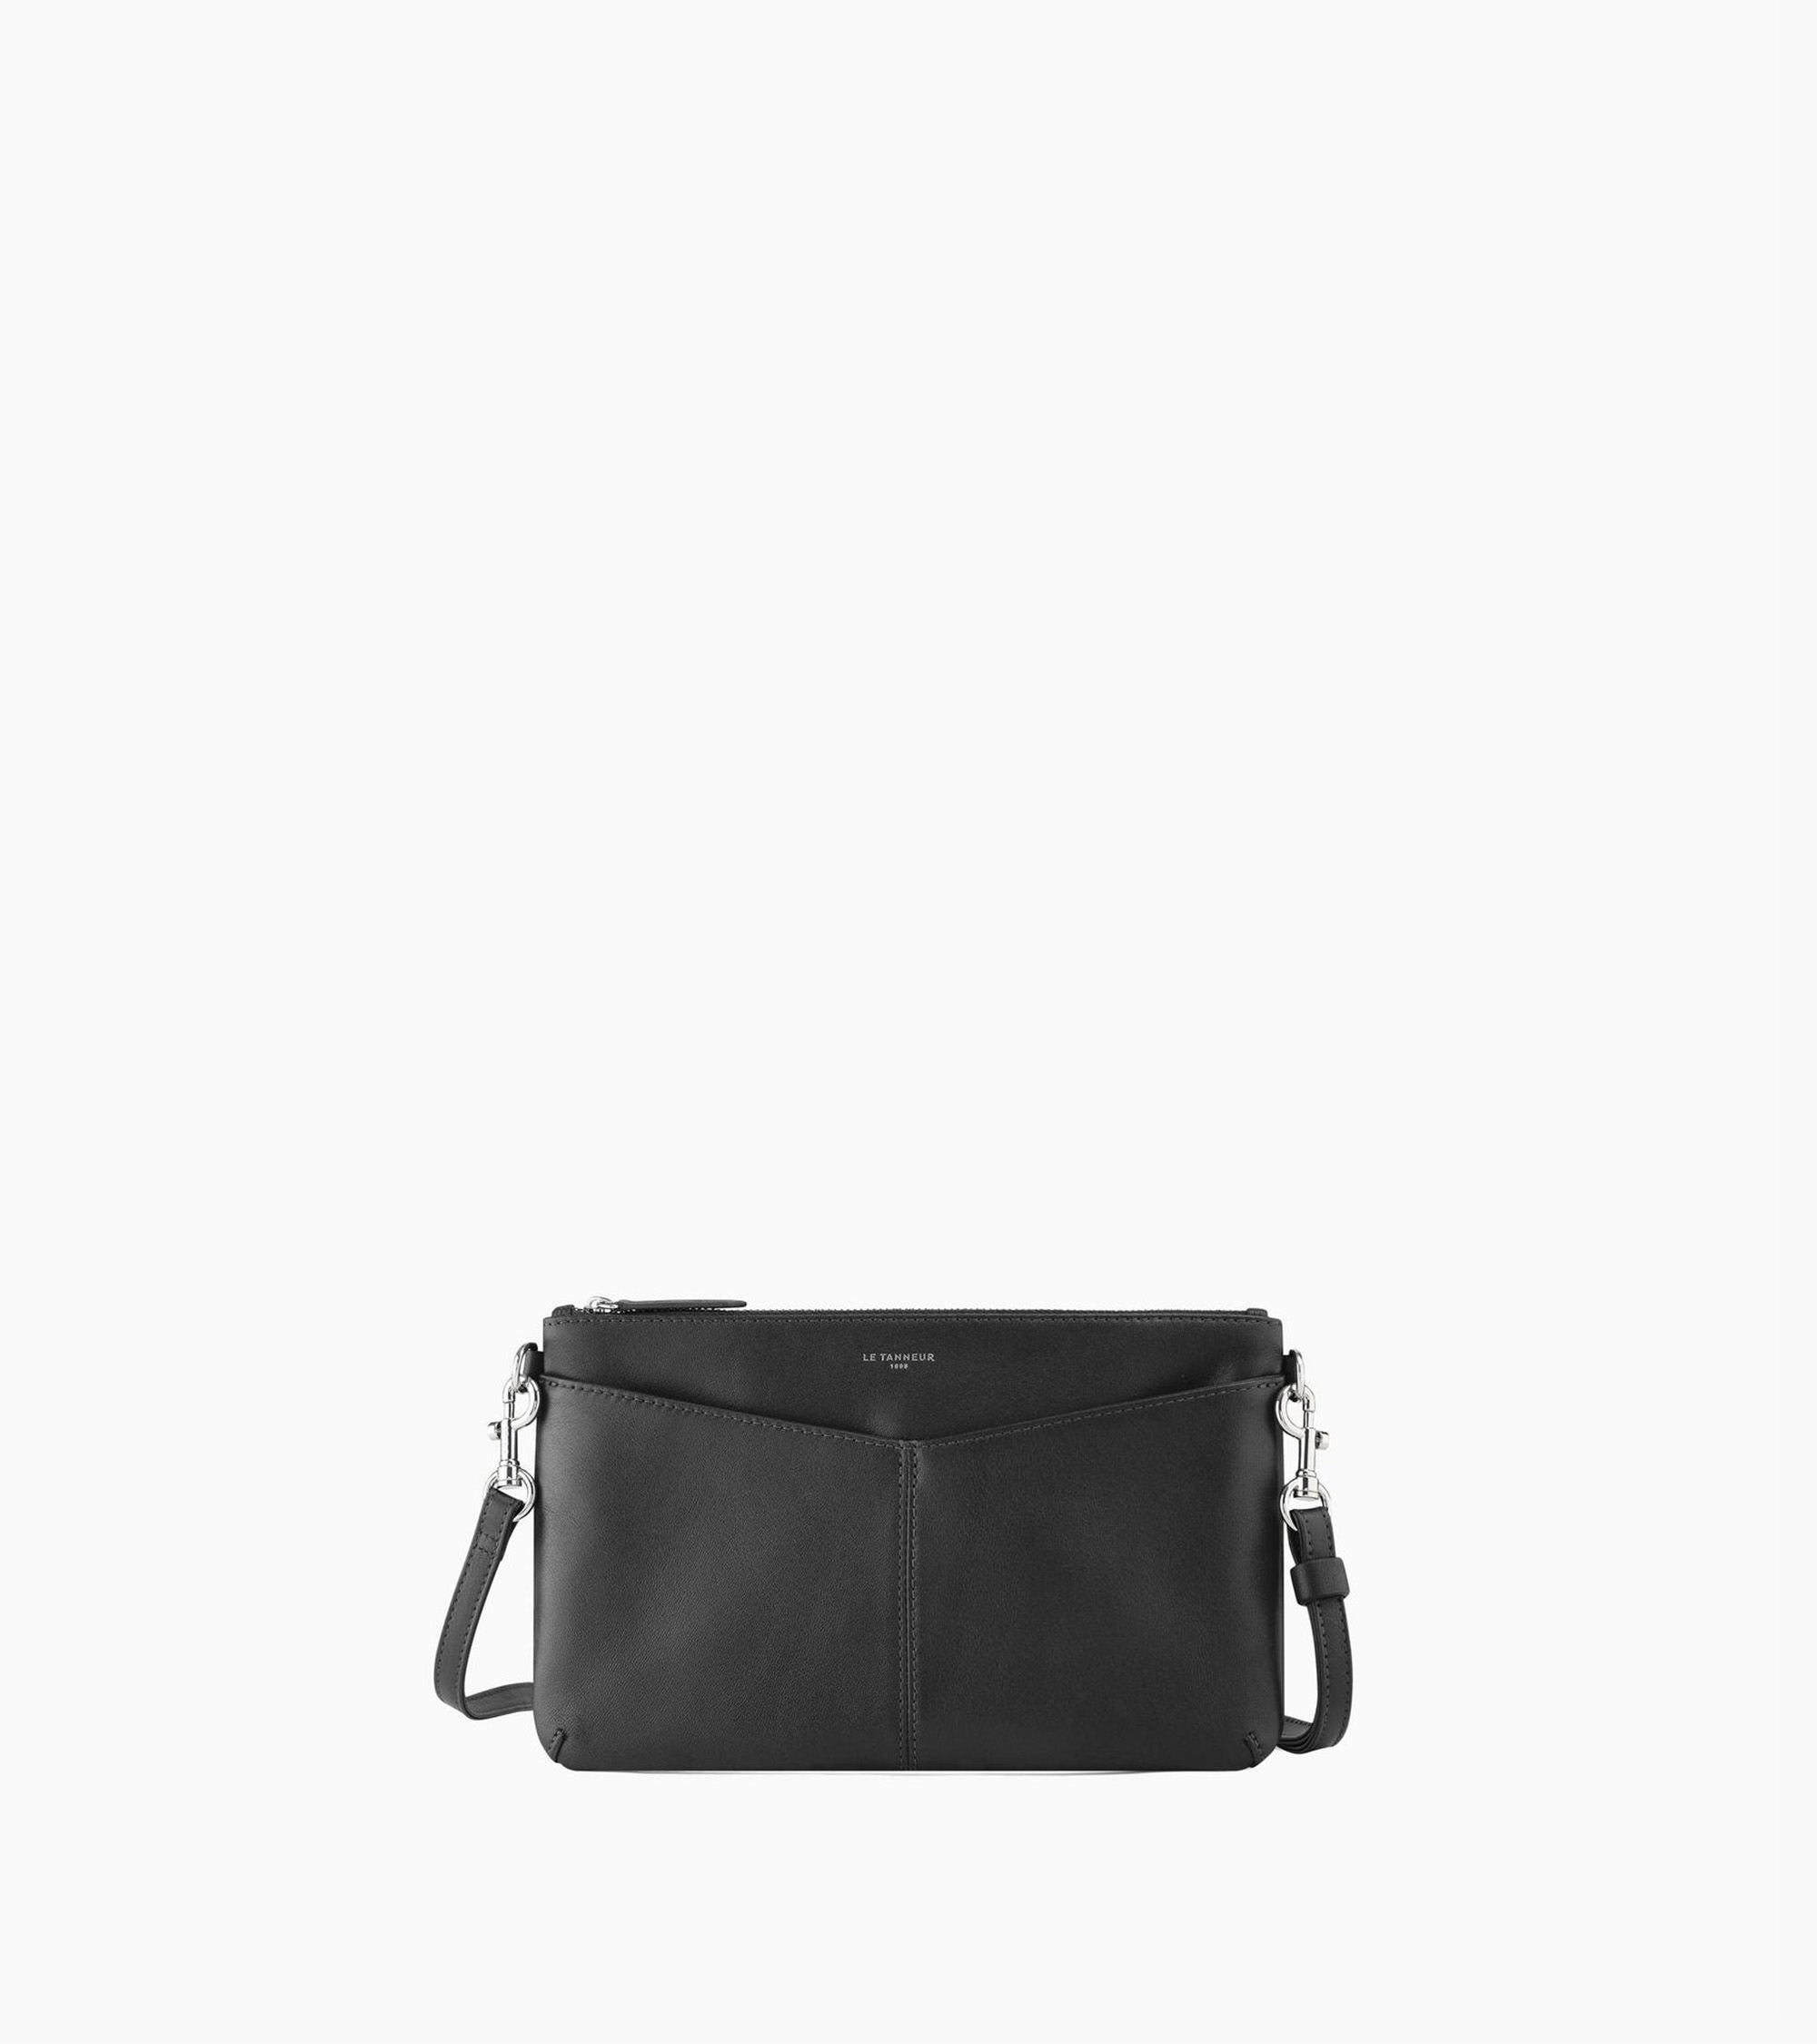 Zipped Charlotte pouch with removable strap in smooth leather